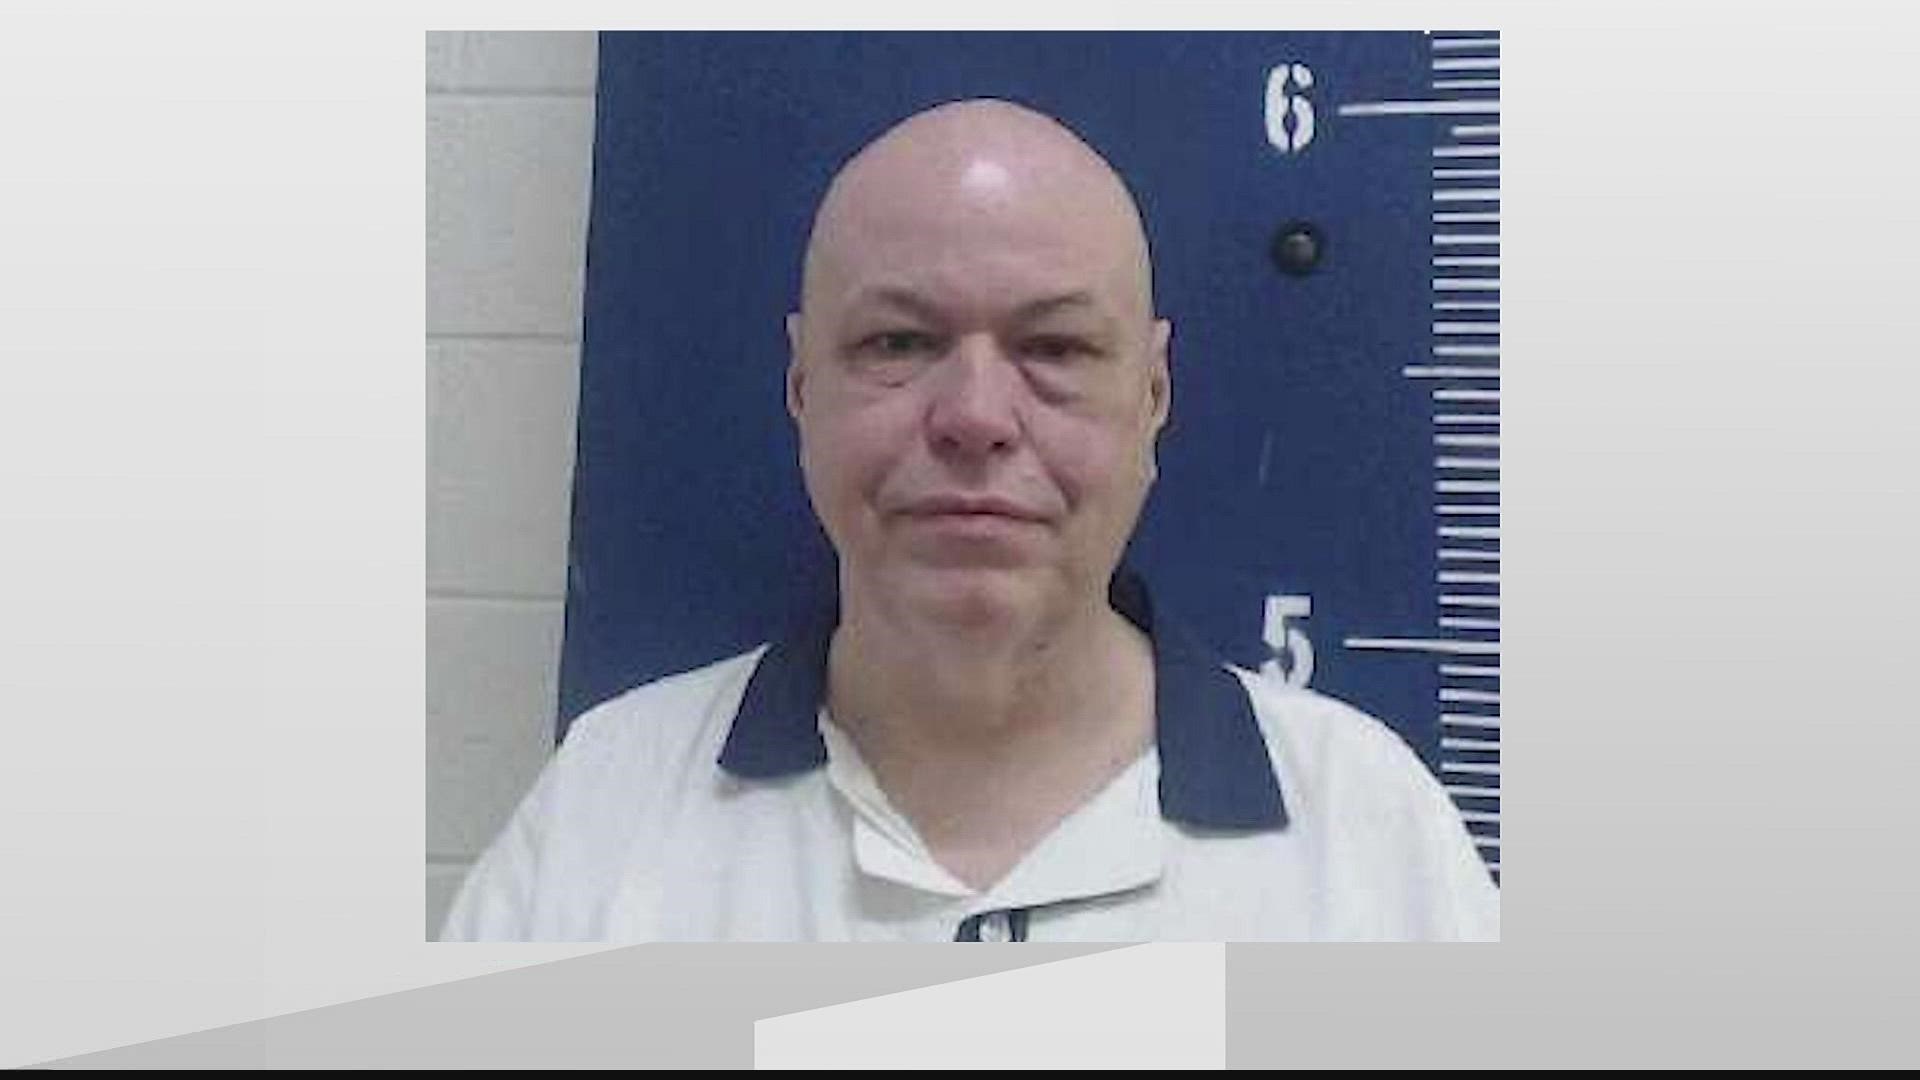 The court heard arguments about the execution of death row inmate Virgil Presnell Jr.